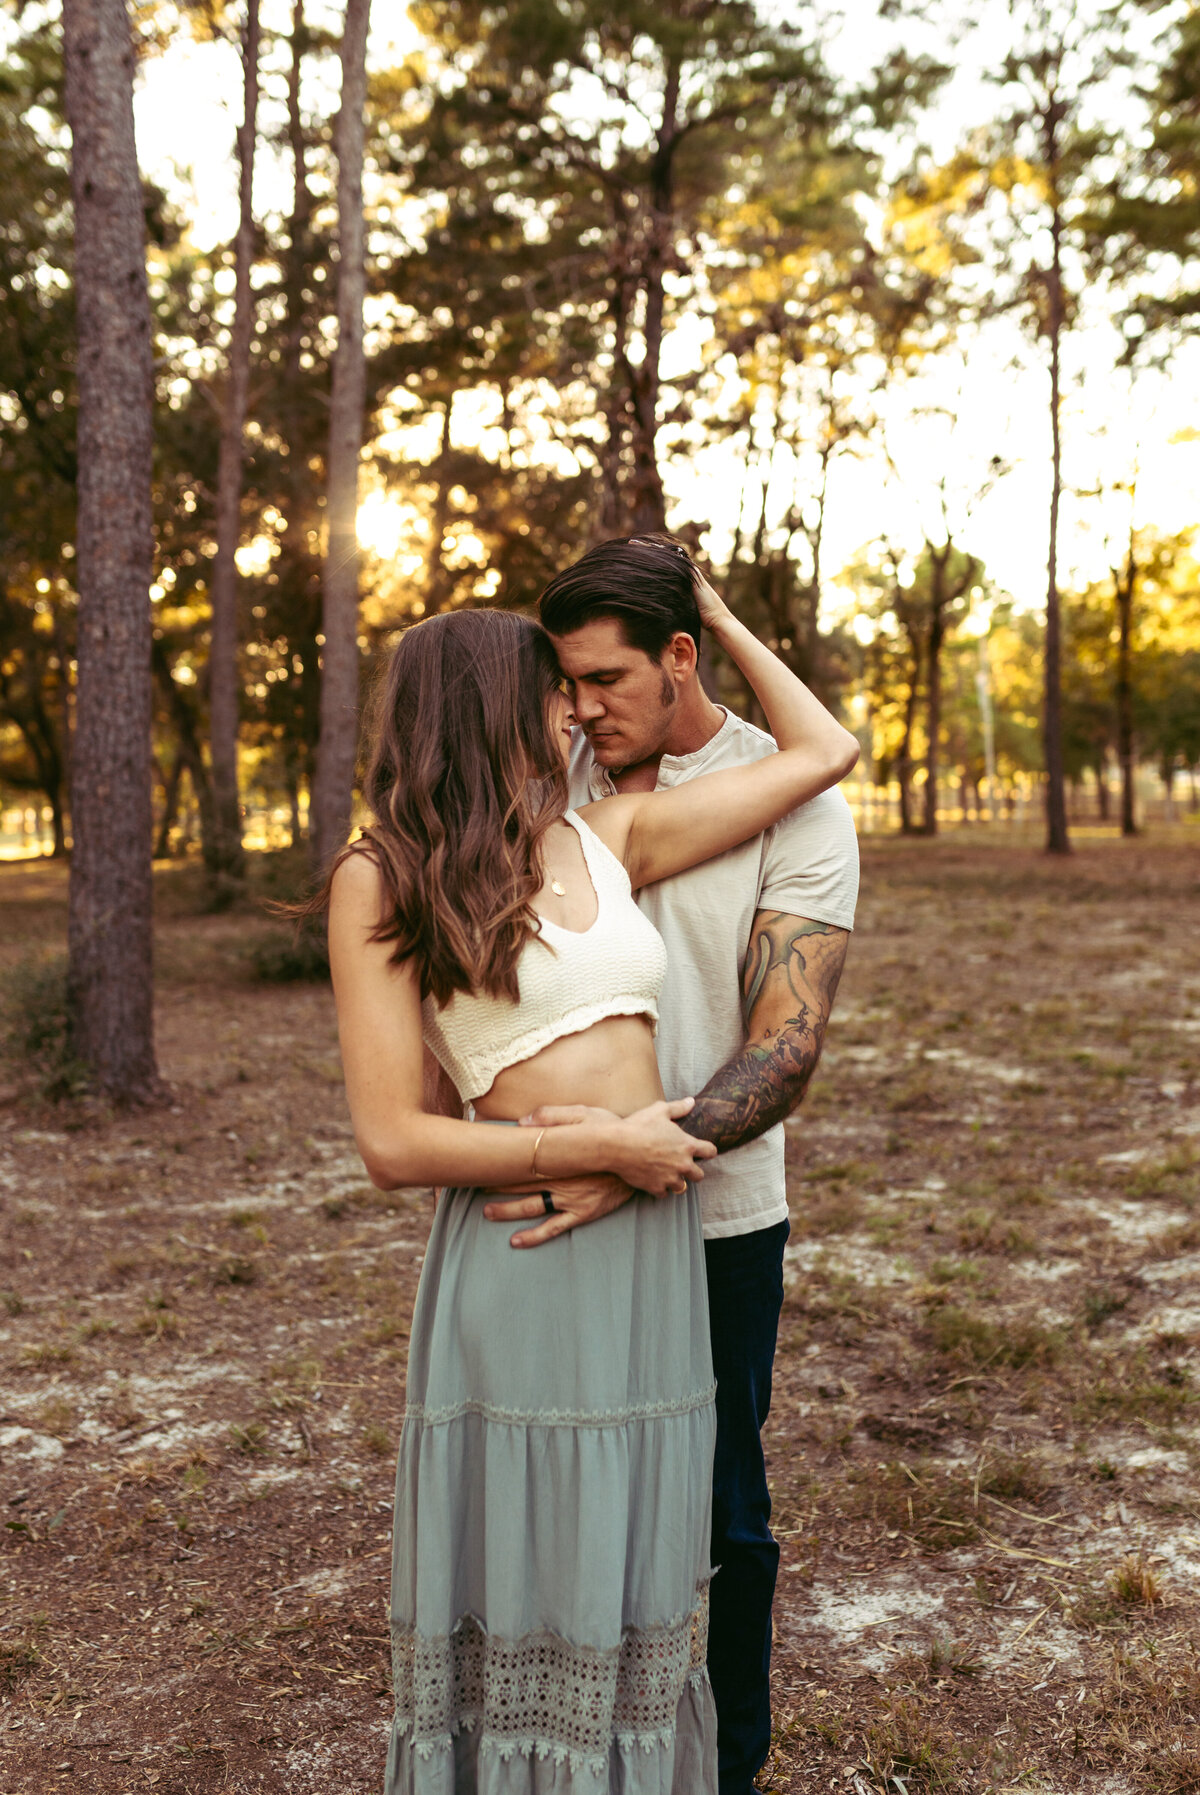 couple embraces intimately in couples outdoor session in niceville fl.